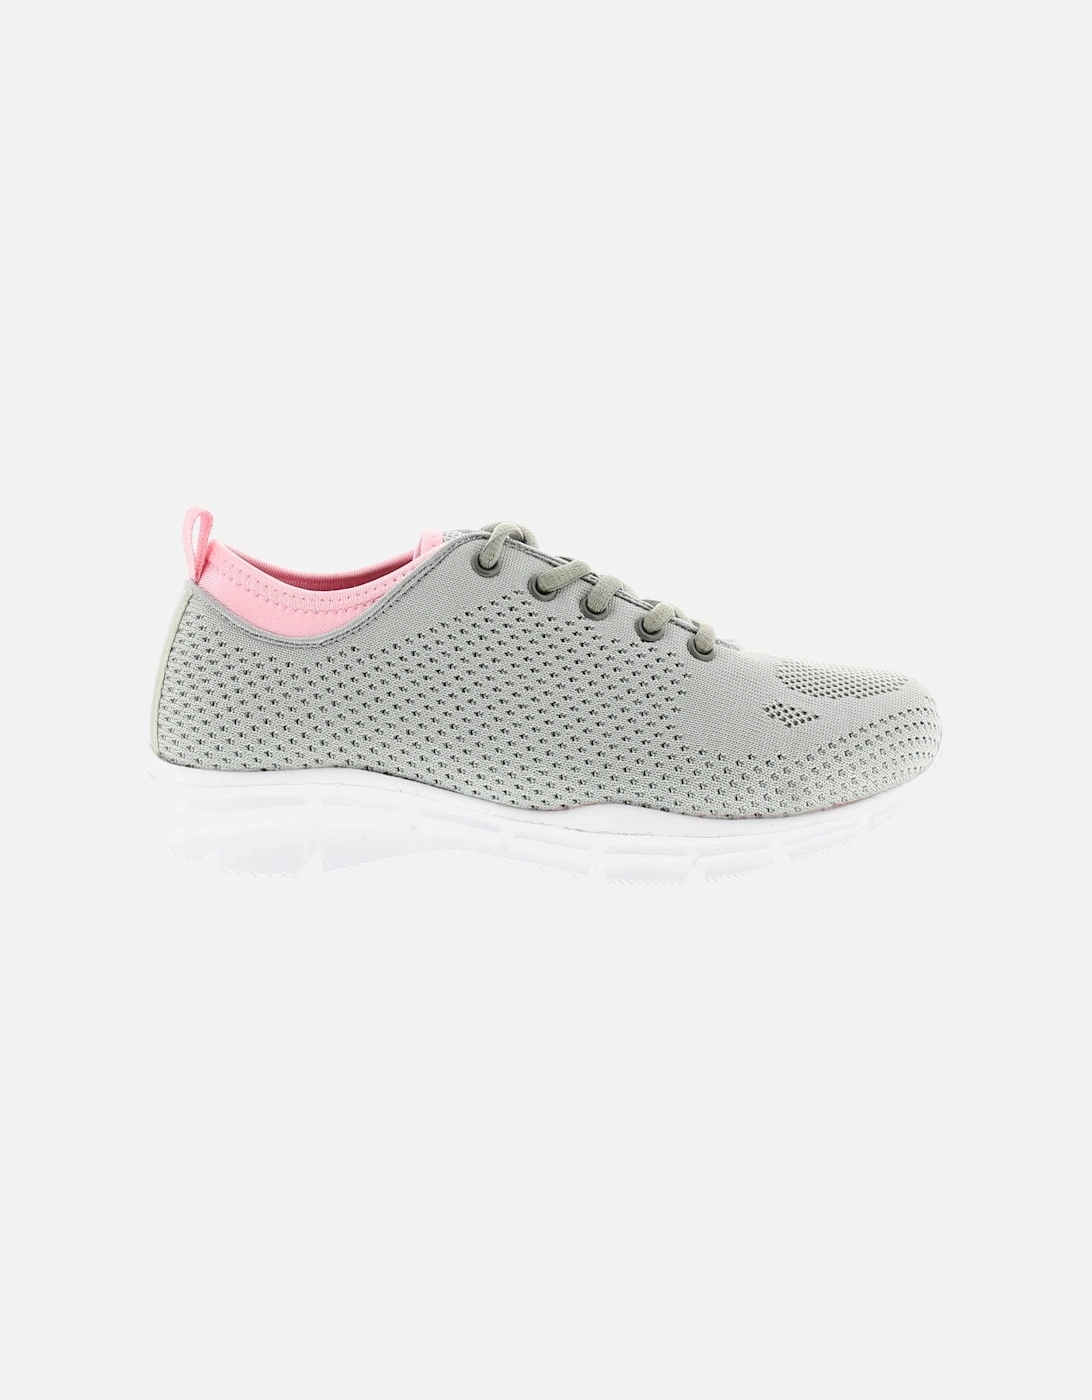 Womens Trainers Rebound Lace Up grey UK Size